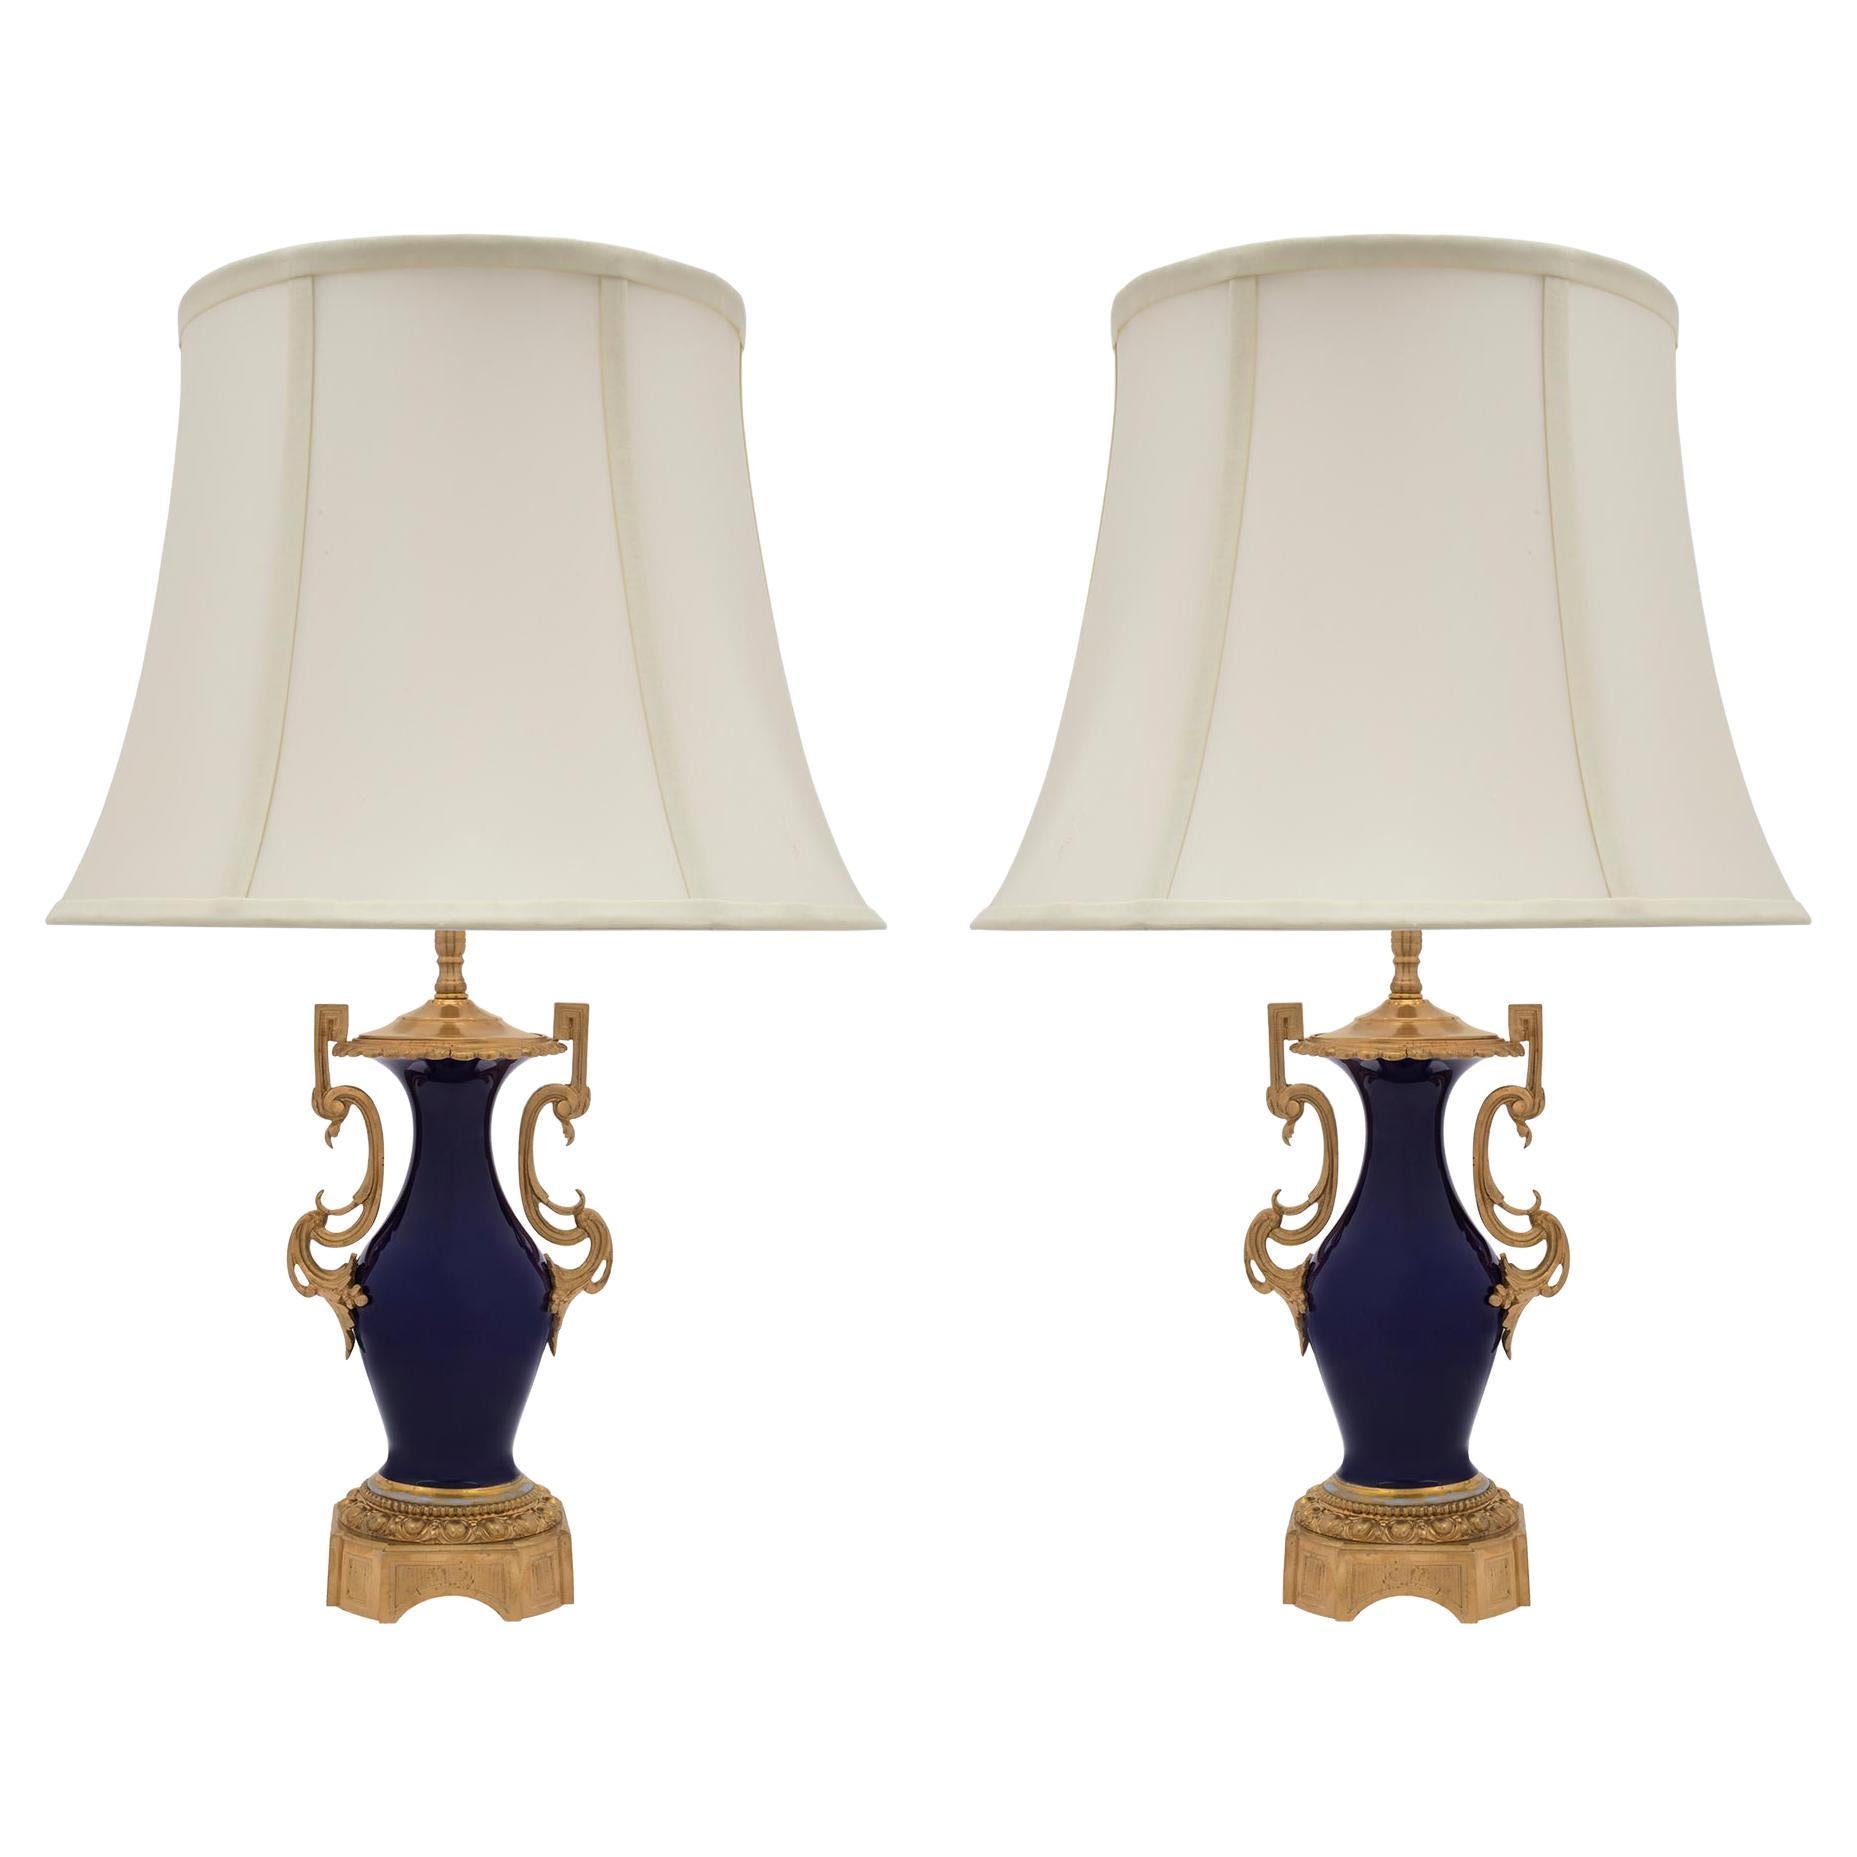 French 19th Century Louis XVI Style Porcelain and Ormolu Lamps